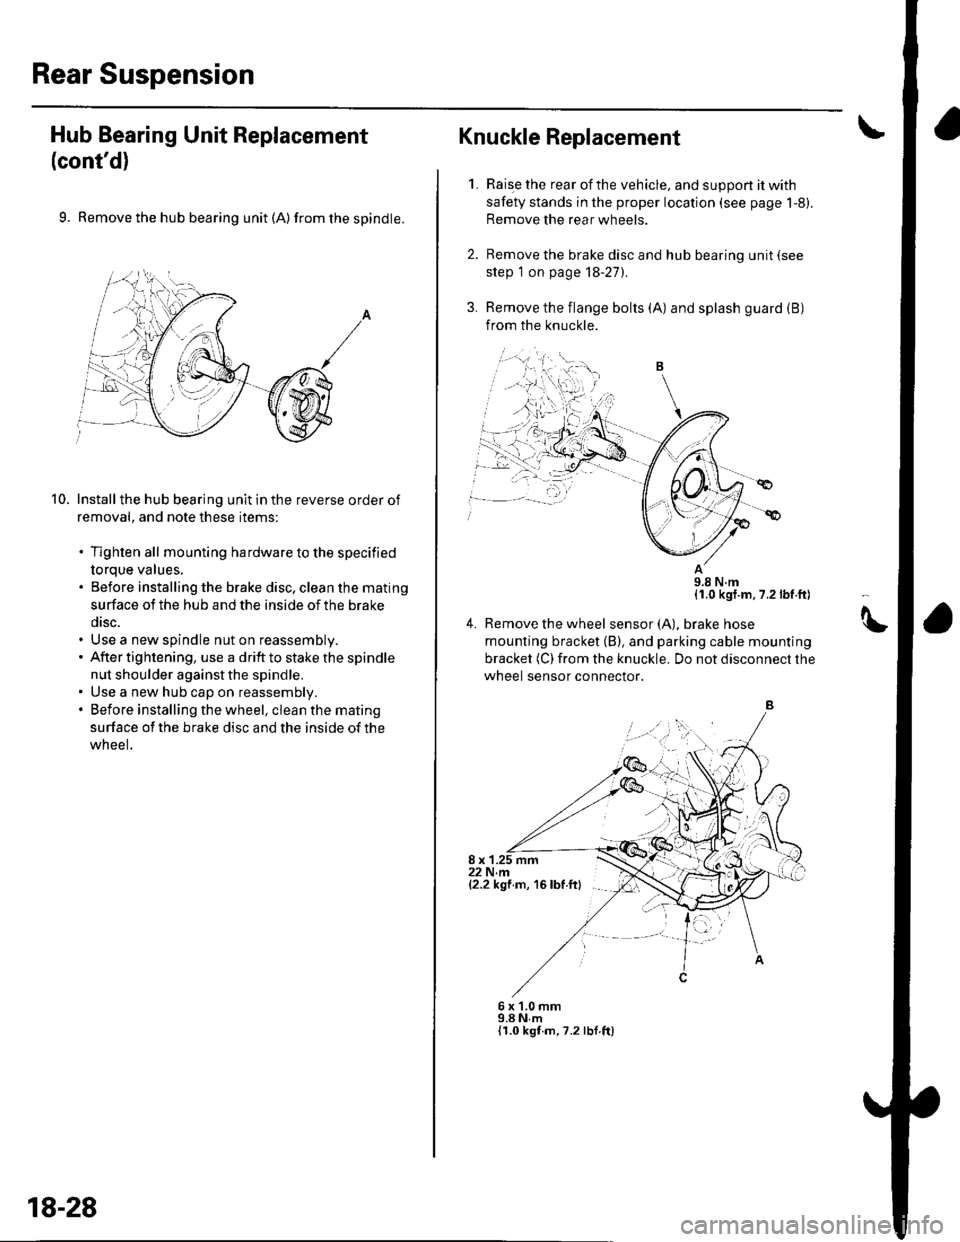 HONDA CIVIC 2002 7.G Service Manual Rear Suspension
Hub Bearing Unit Replacement
(contd)
9. Remove the hub bearing unit (A) from the spindle.
Install the hub bearing unit in the reverse order of
removal, and note these items:
. Tighten